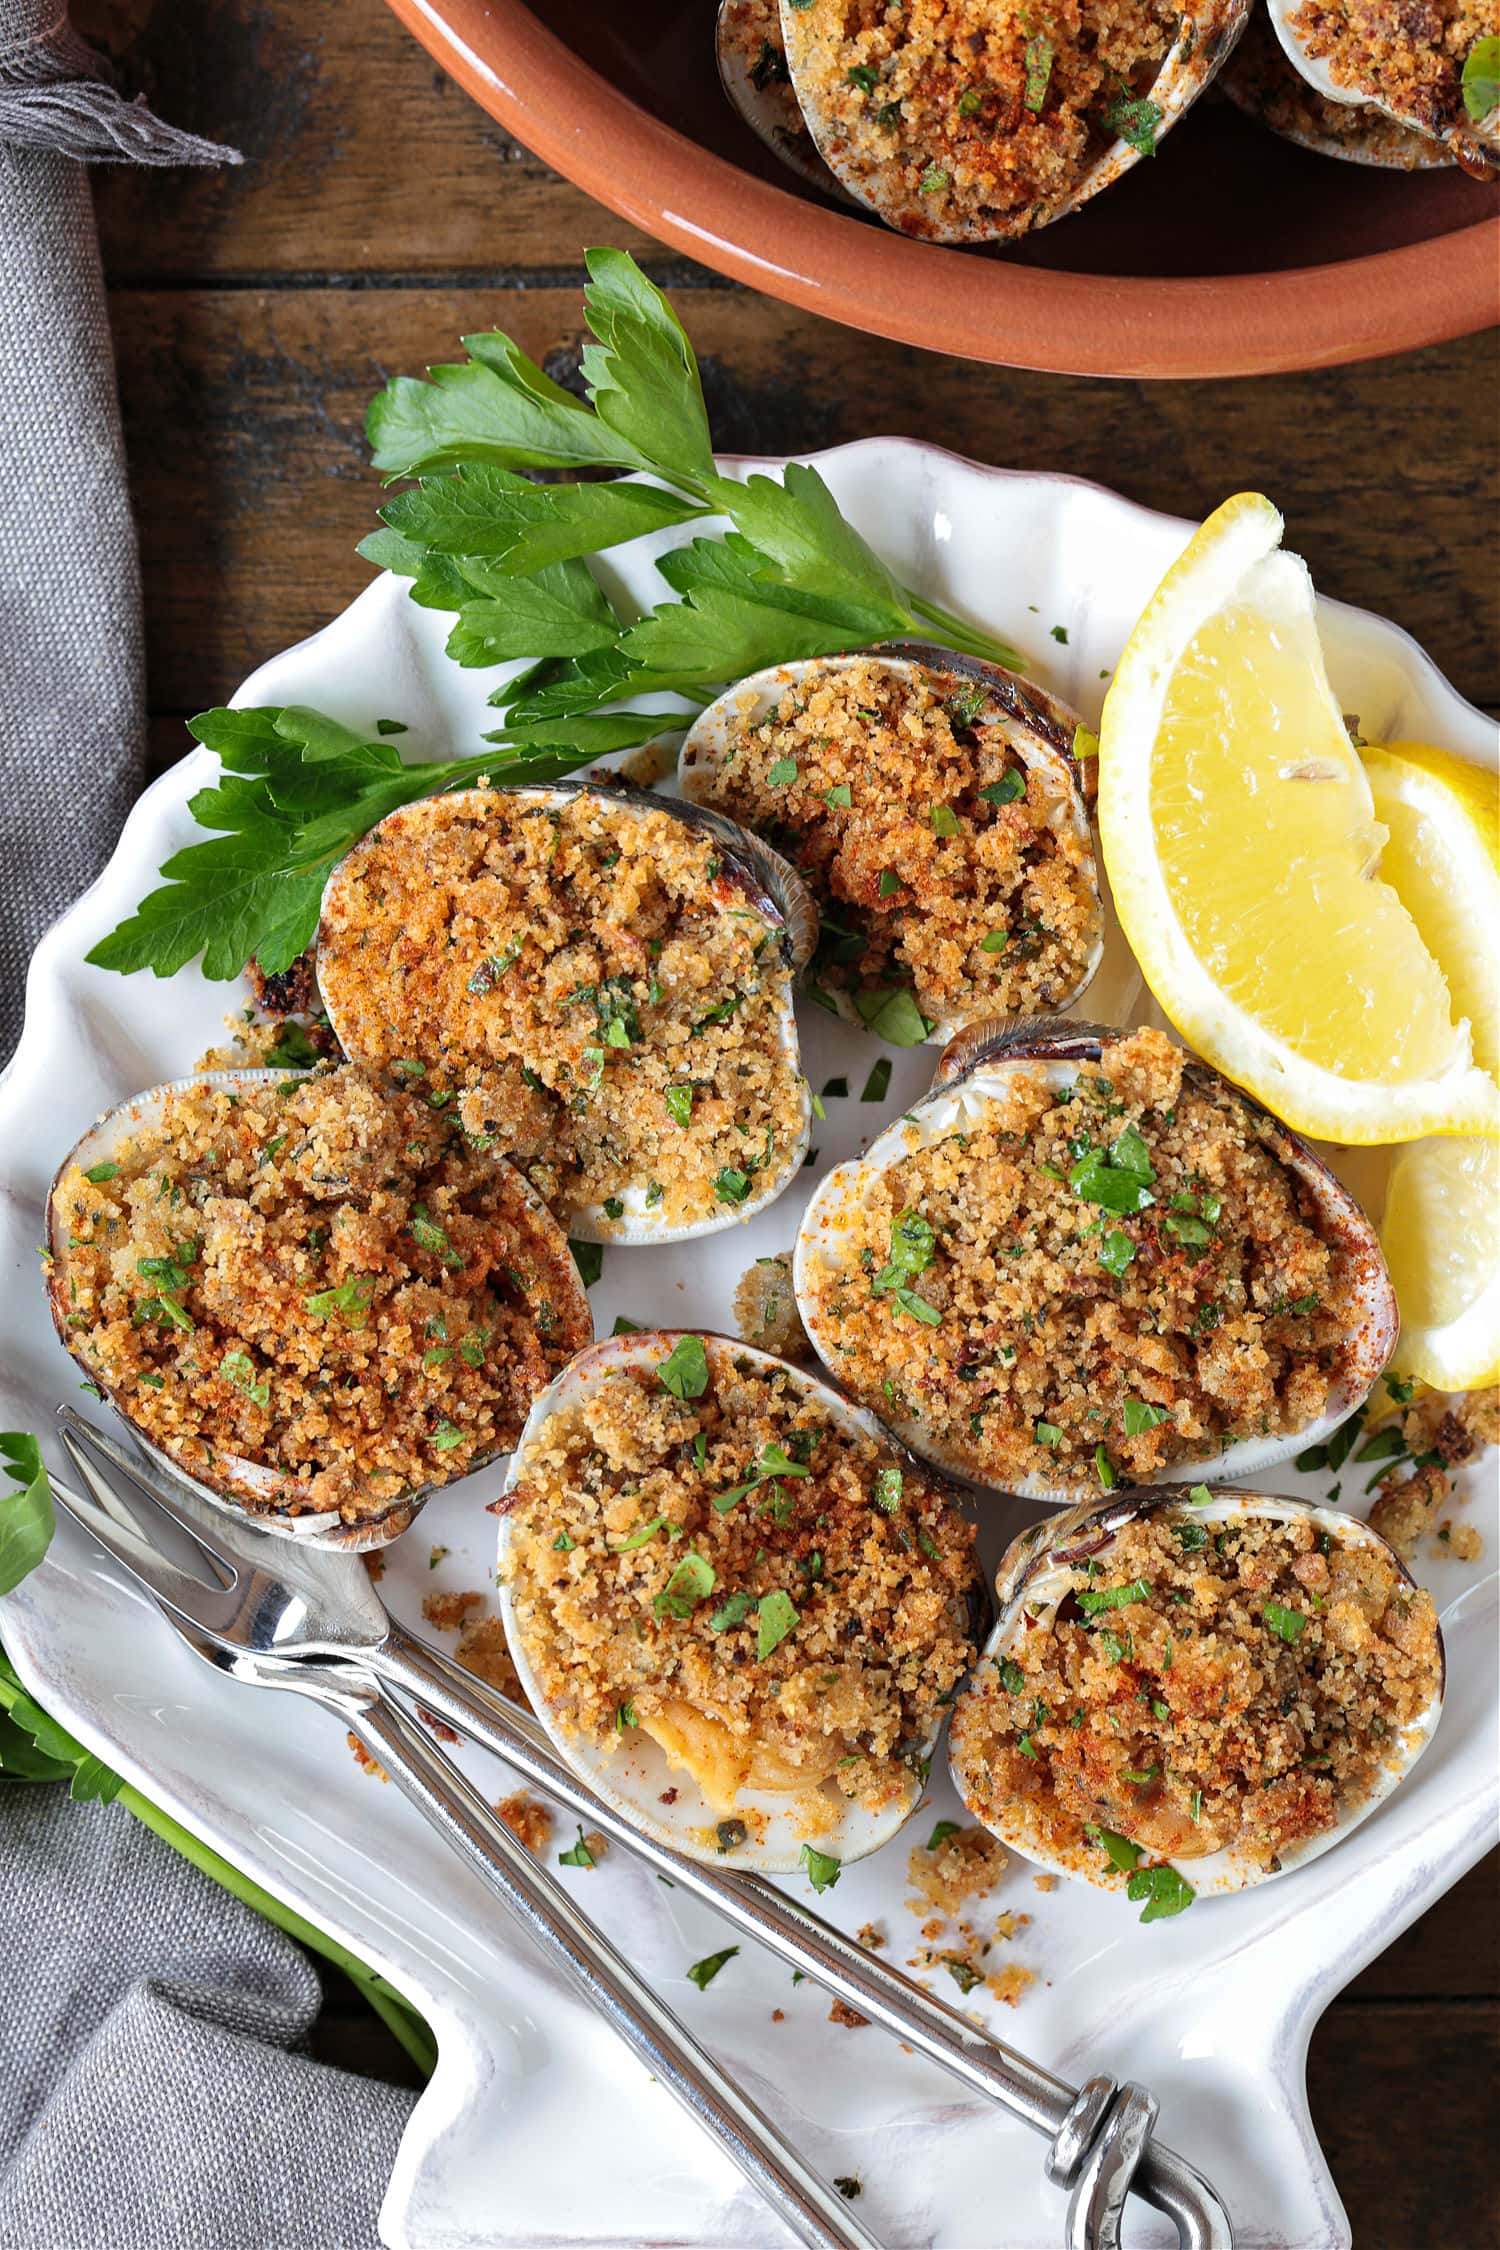 baked clams in shell dish with lemons and parsley